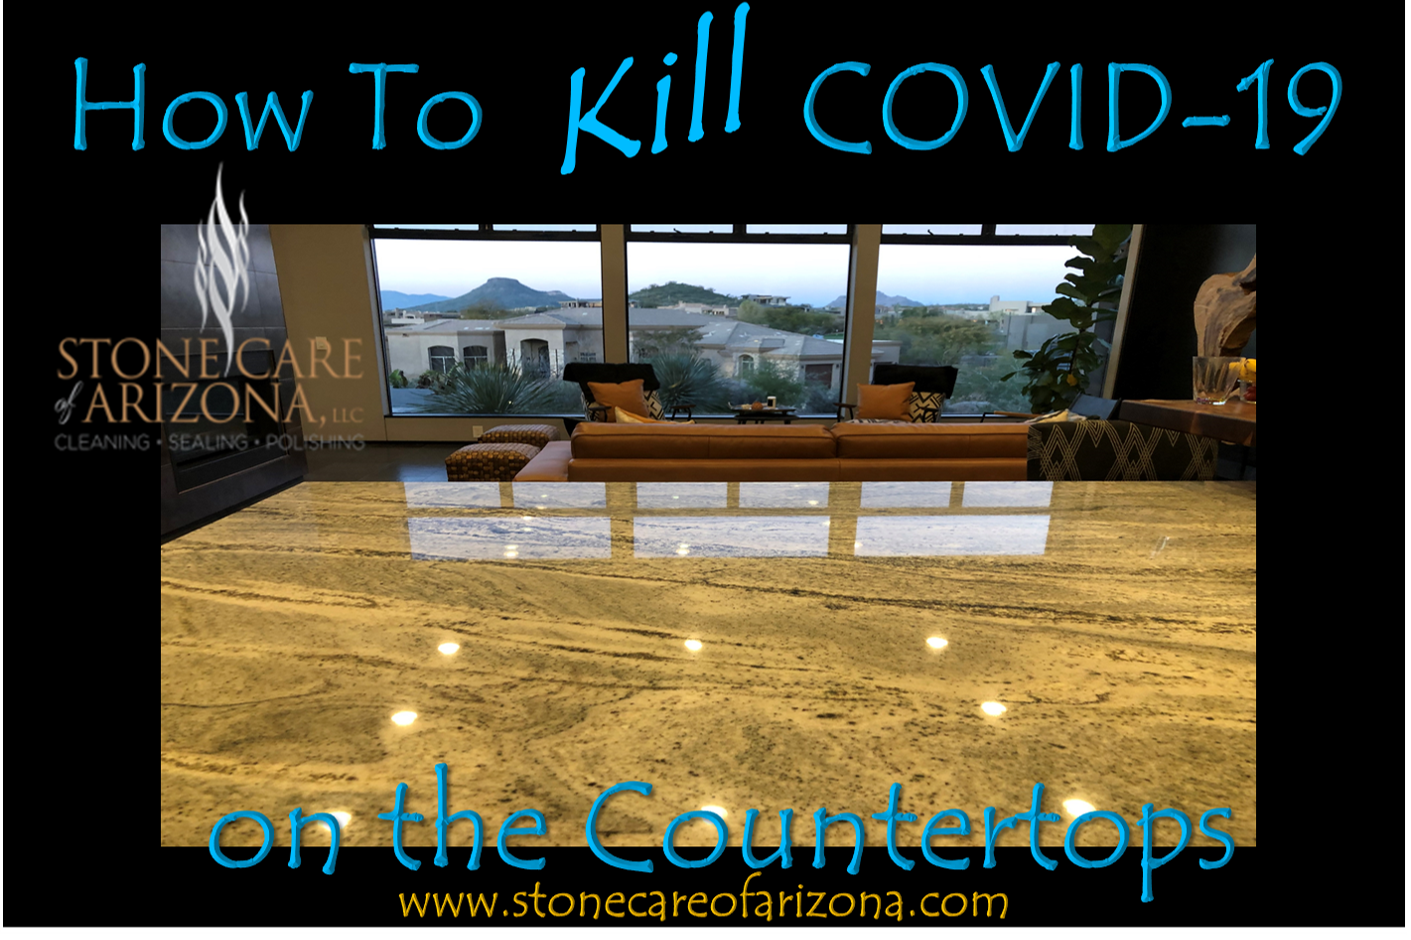 How to destroy COVID-19 on Granite, Marble Travertine  and Limestone Countertops